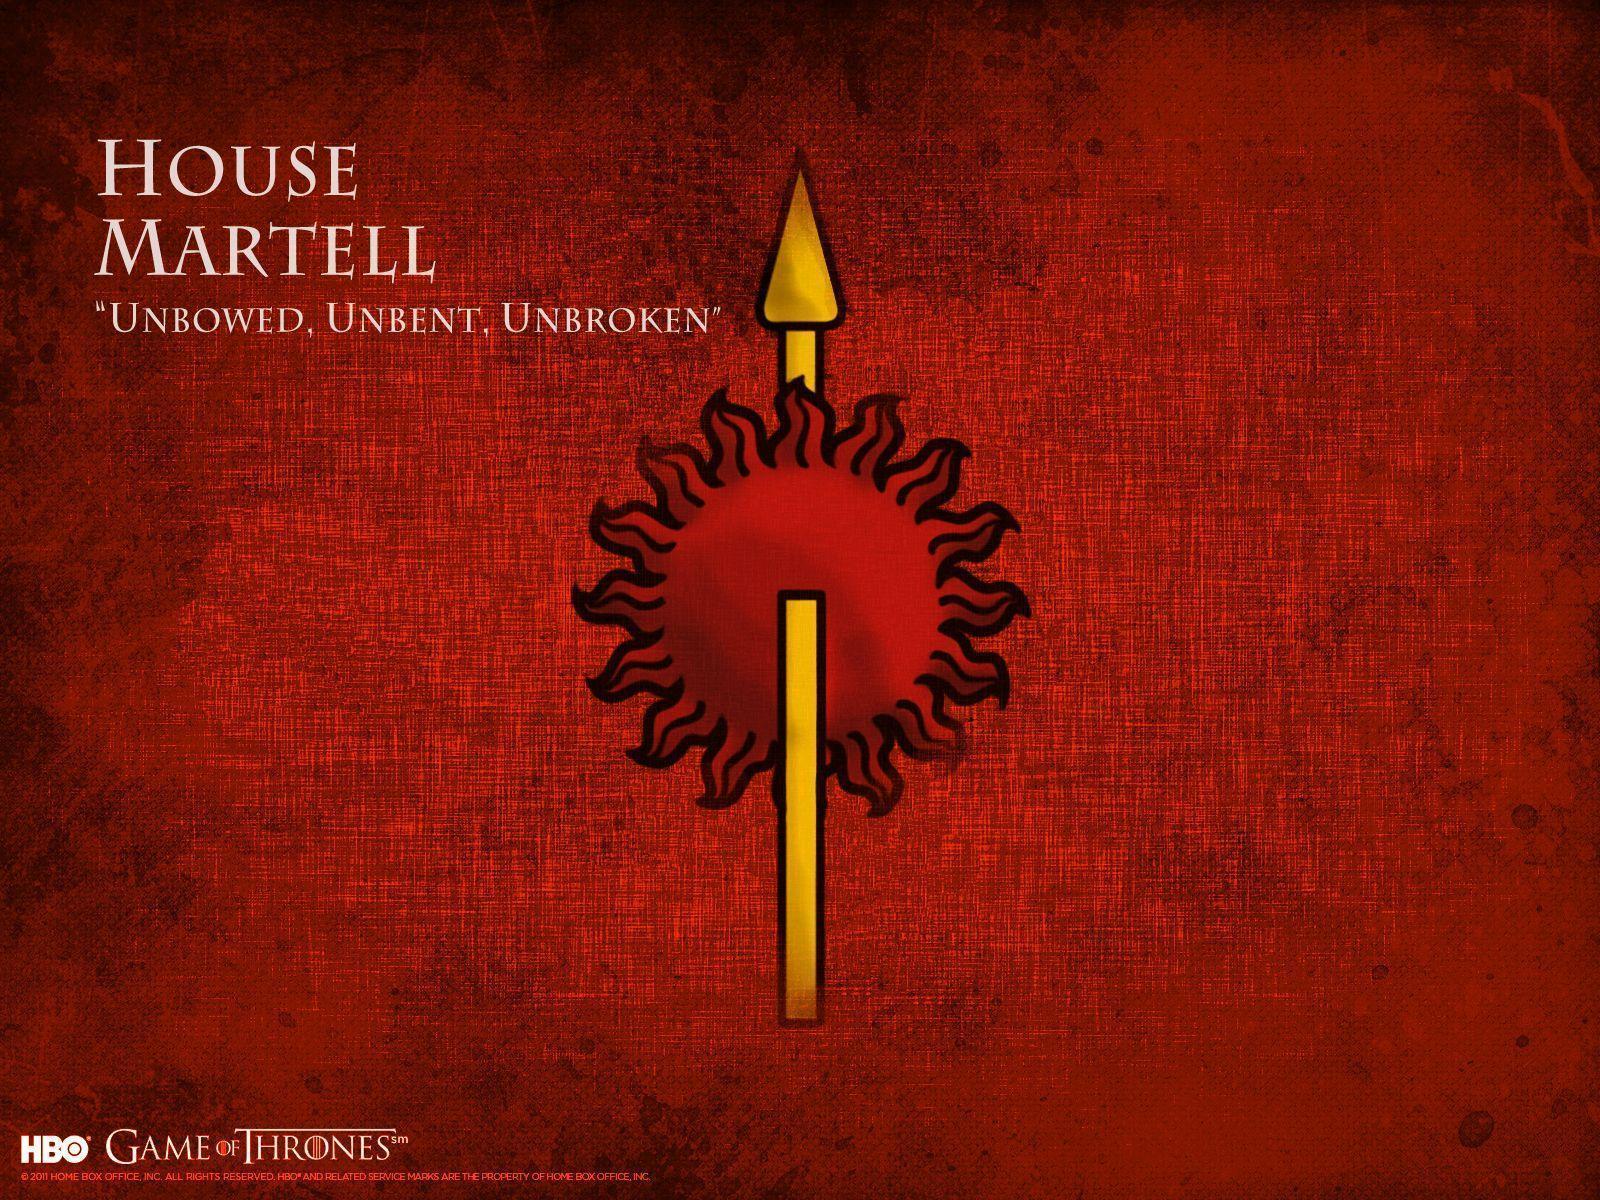 GAY:27 Game Of Thrones Wallpaper, Top Hbo Game Of Thrones